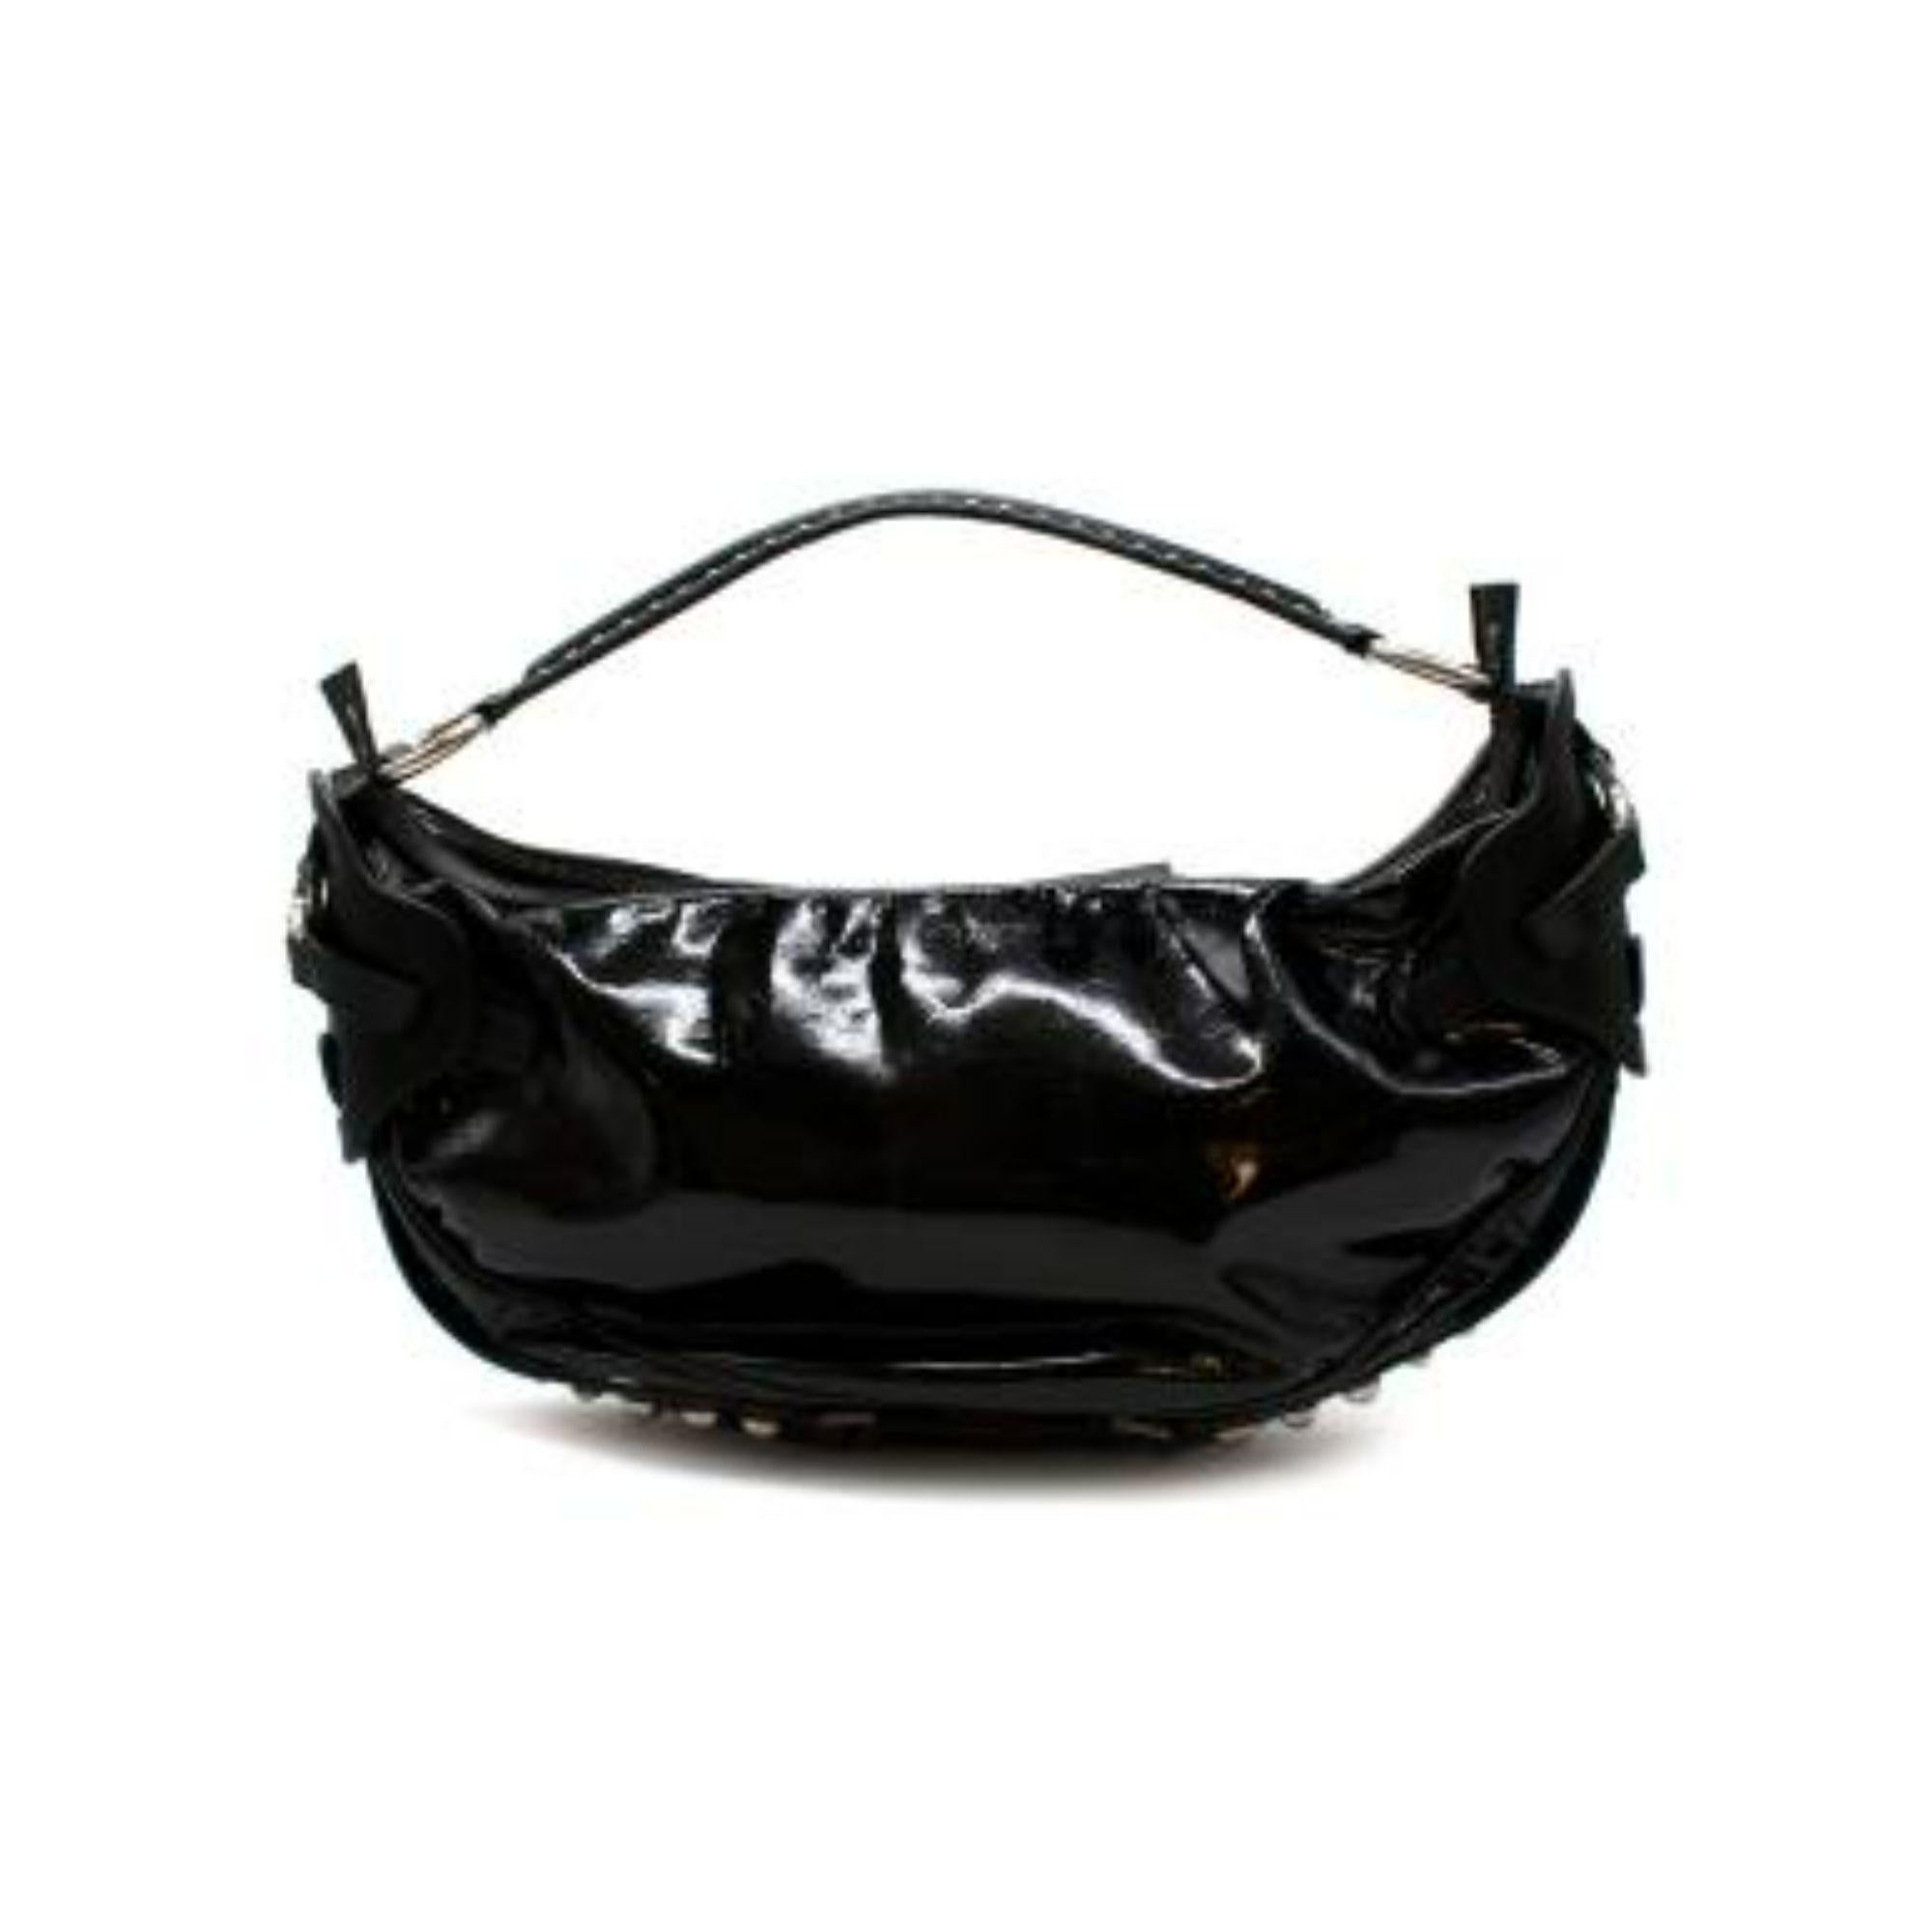 Versace Studded Patent Leather Shoulder Bag In Good Condition For Sale In London, GB